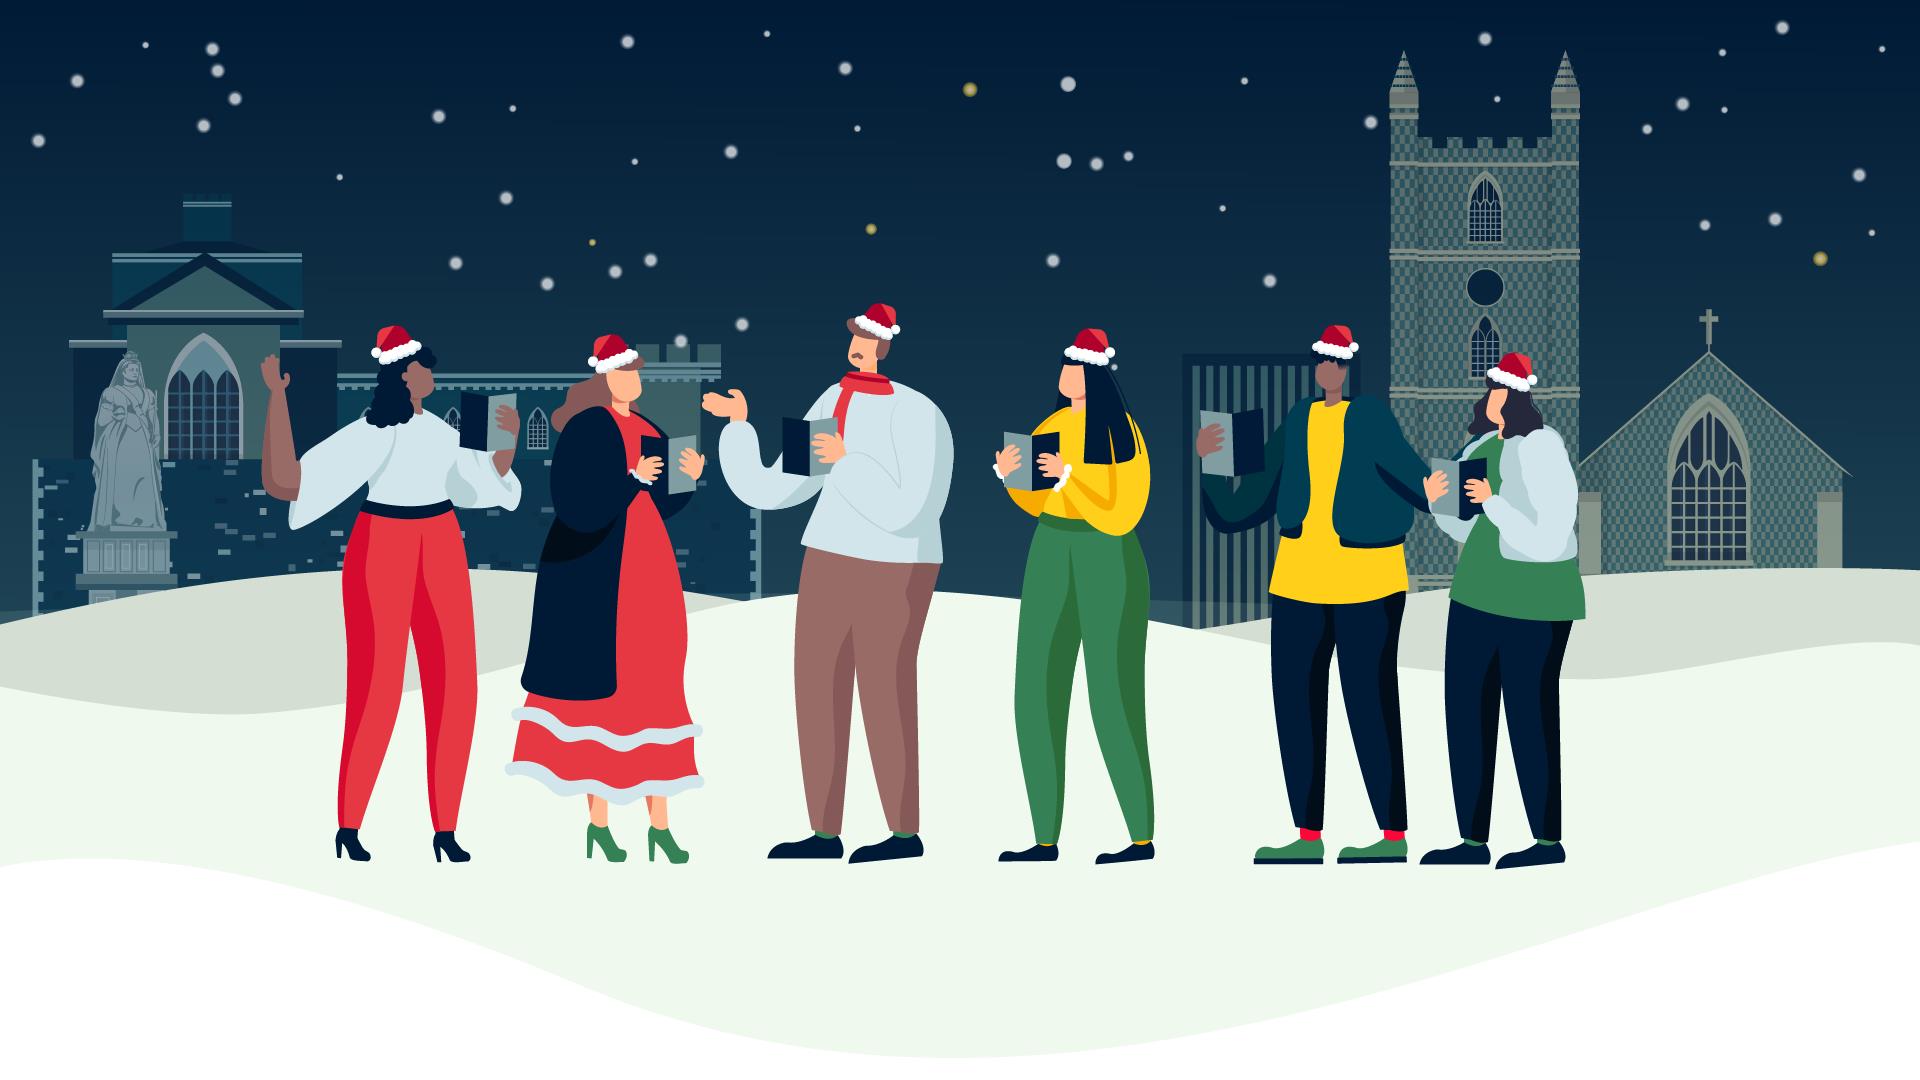 Illustrated Christmas scene showing a group of carol singers in Reading